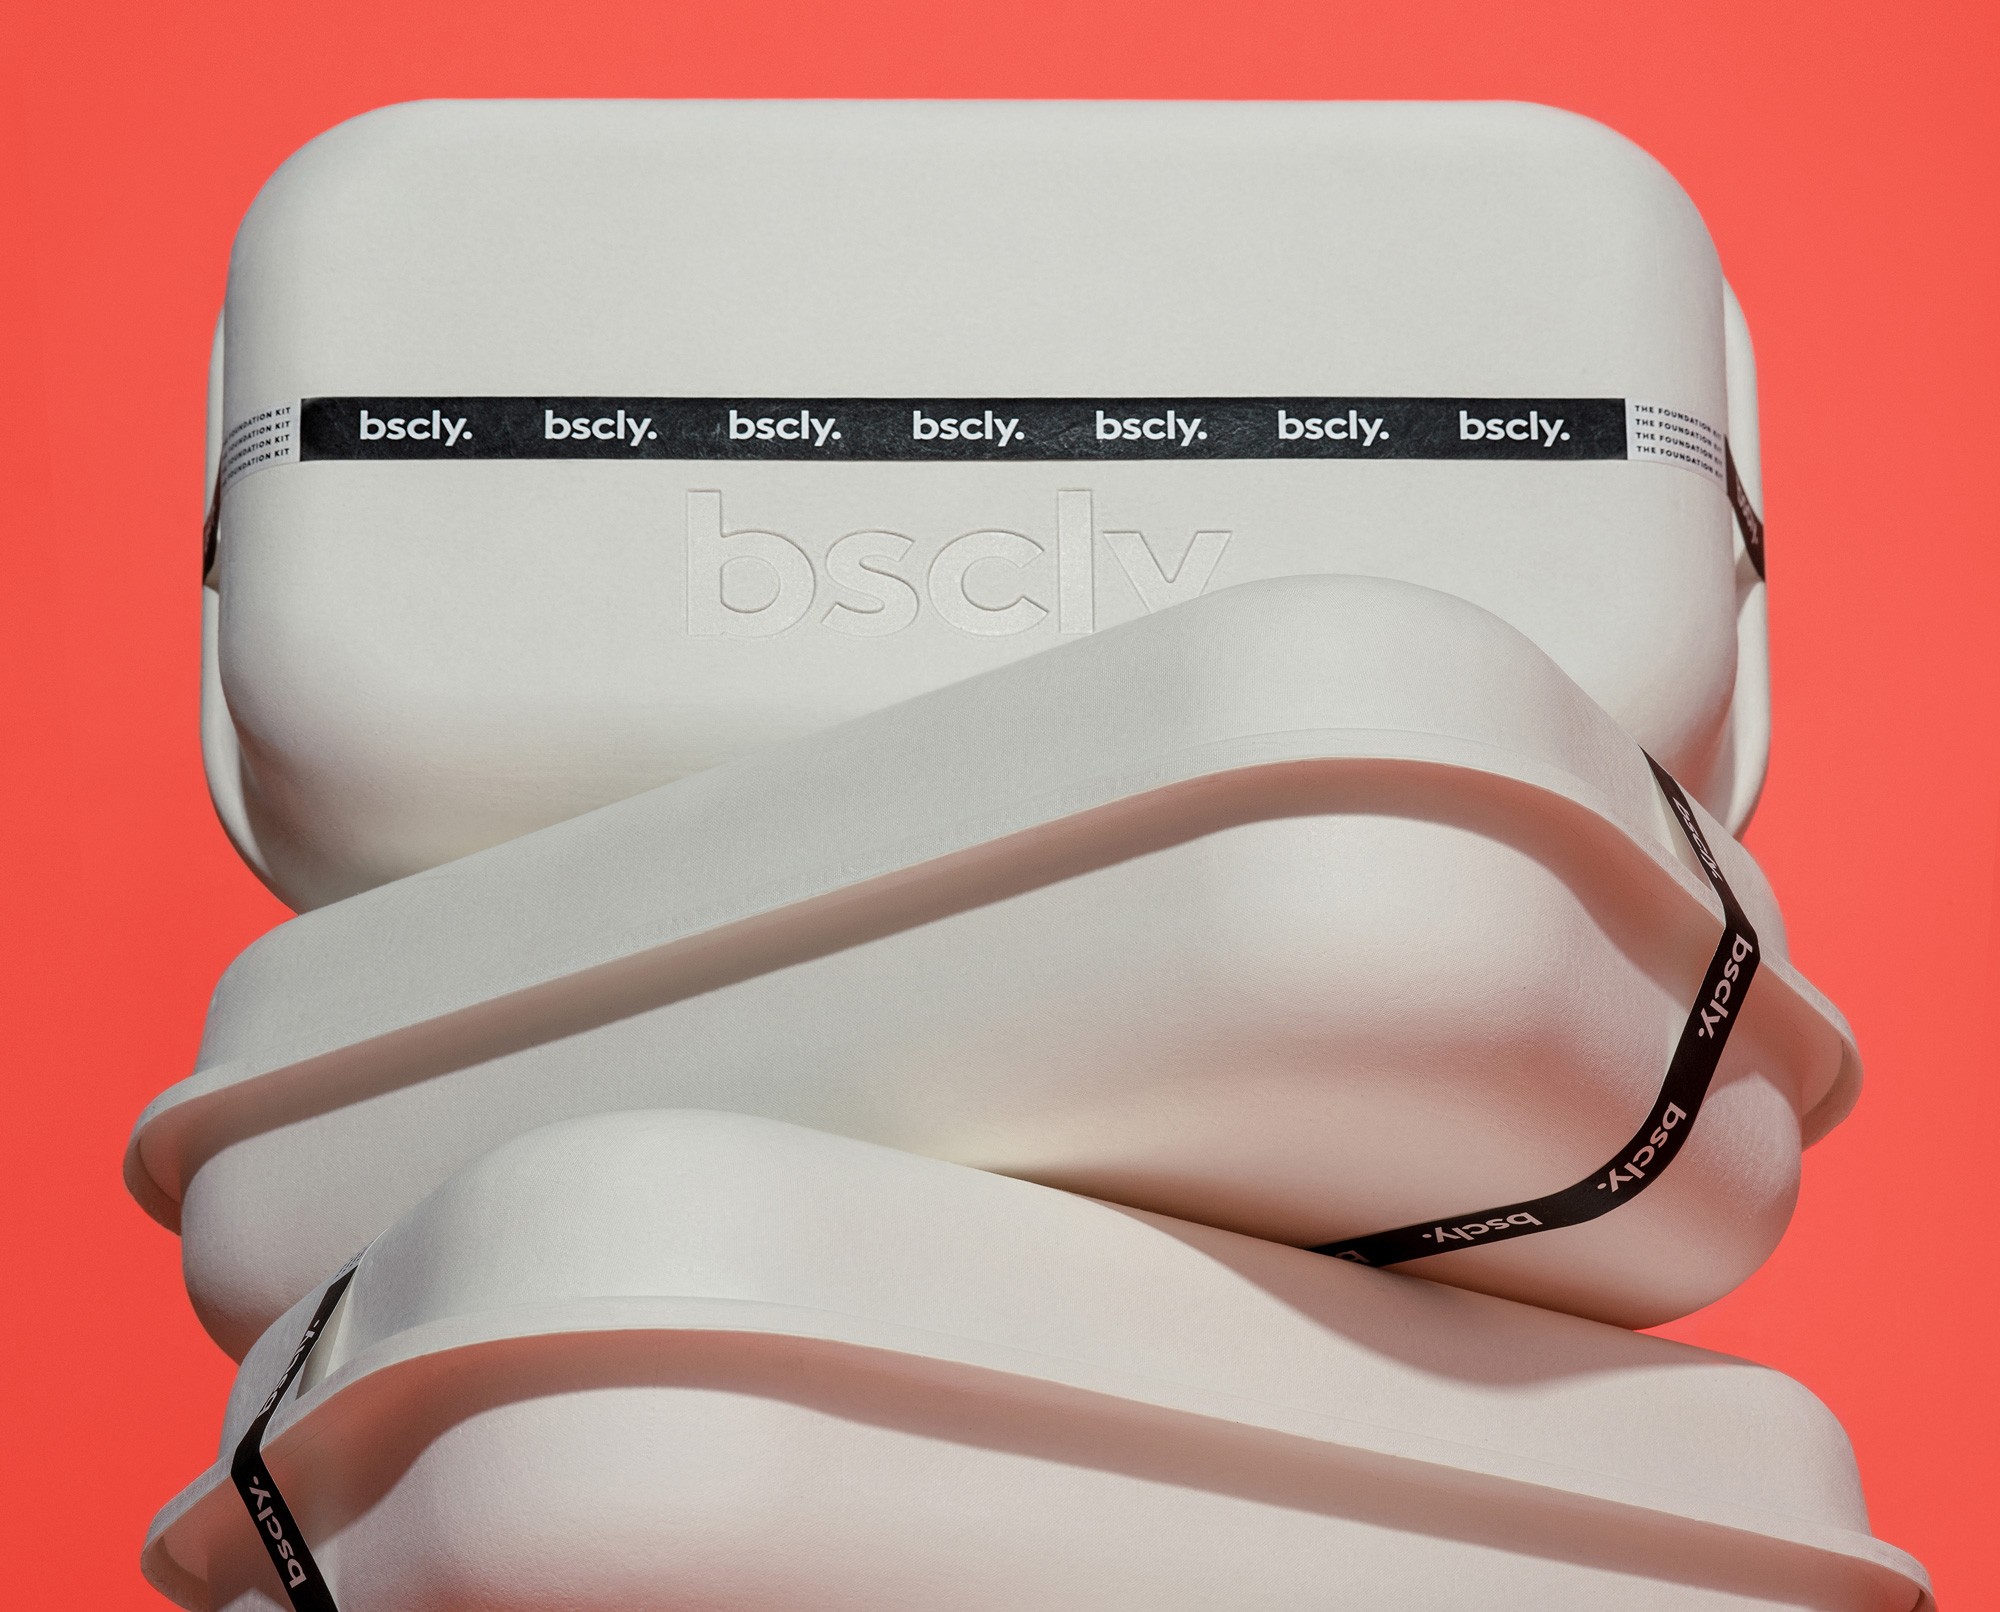 New Logo and Packaging for bscly by V&H